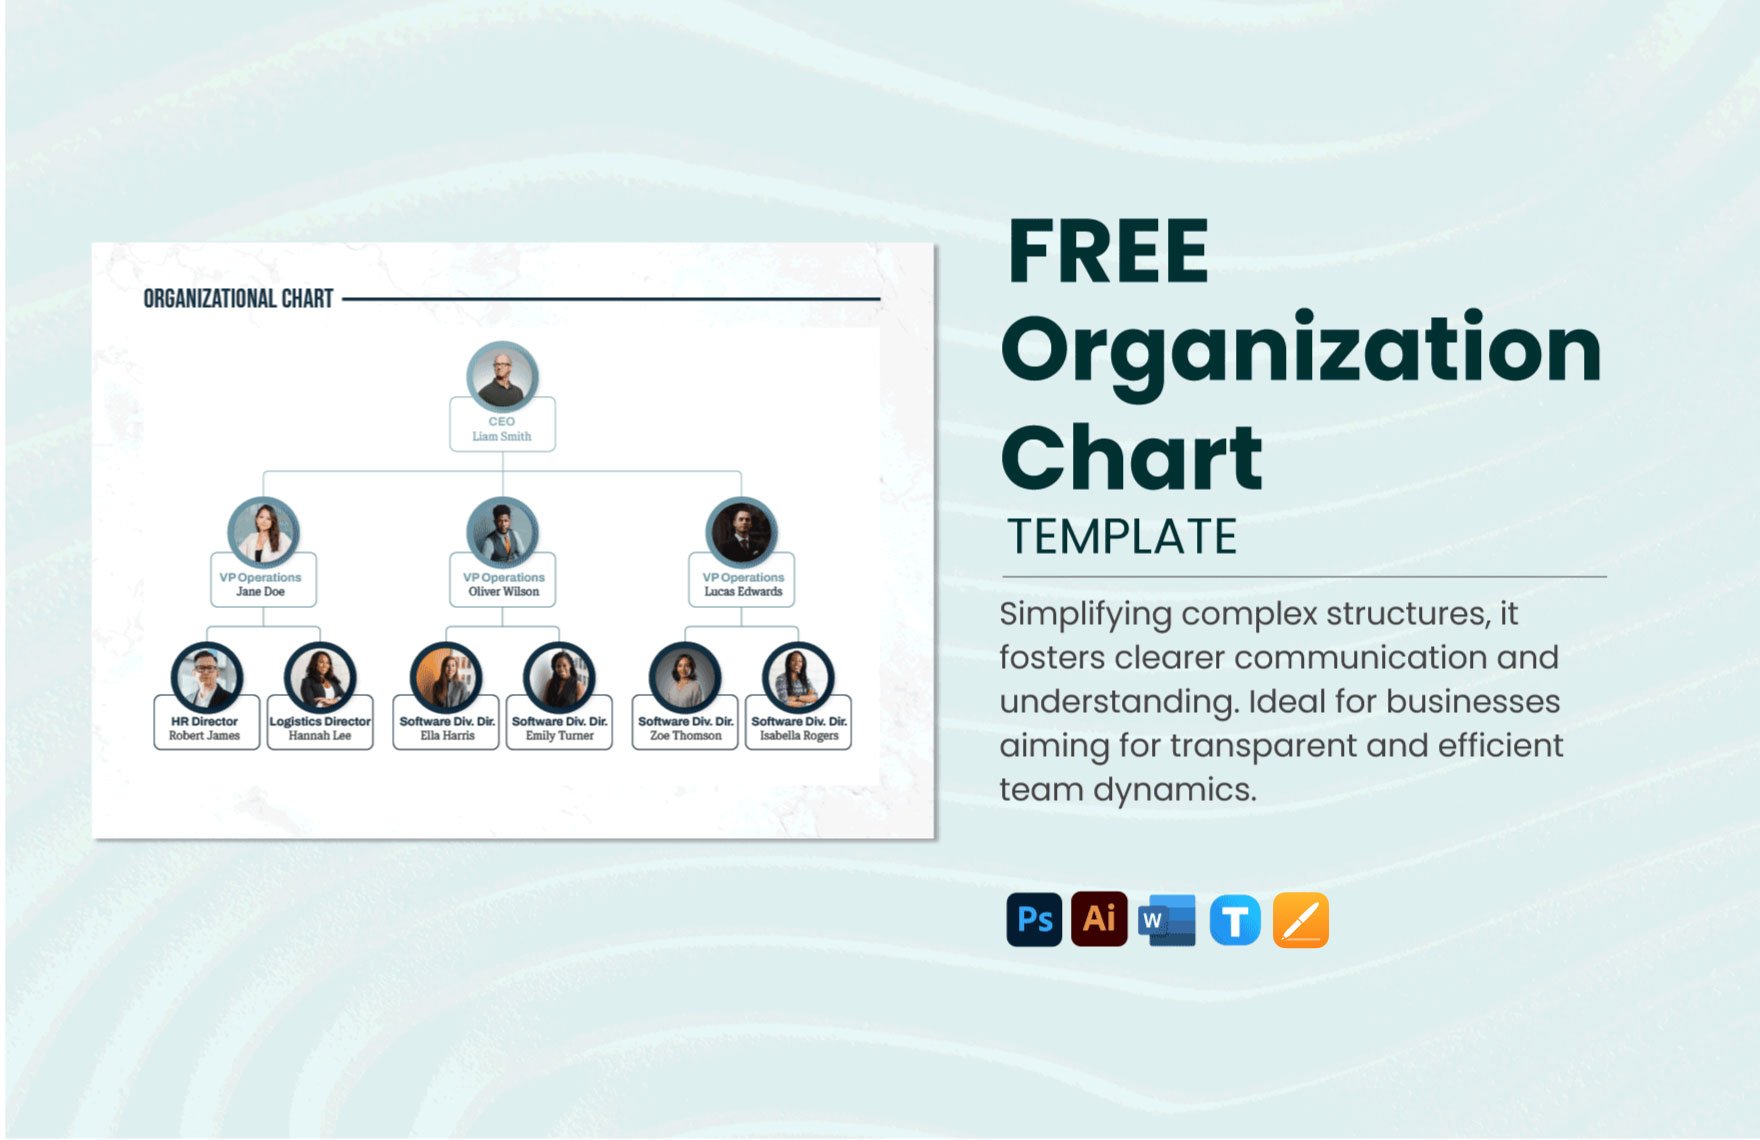 Organization Chart Template in Photoshop, Illustrator, Word, Pages ...